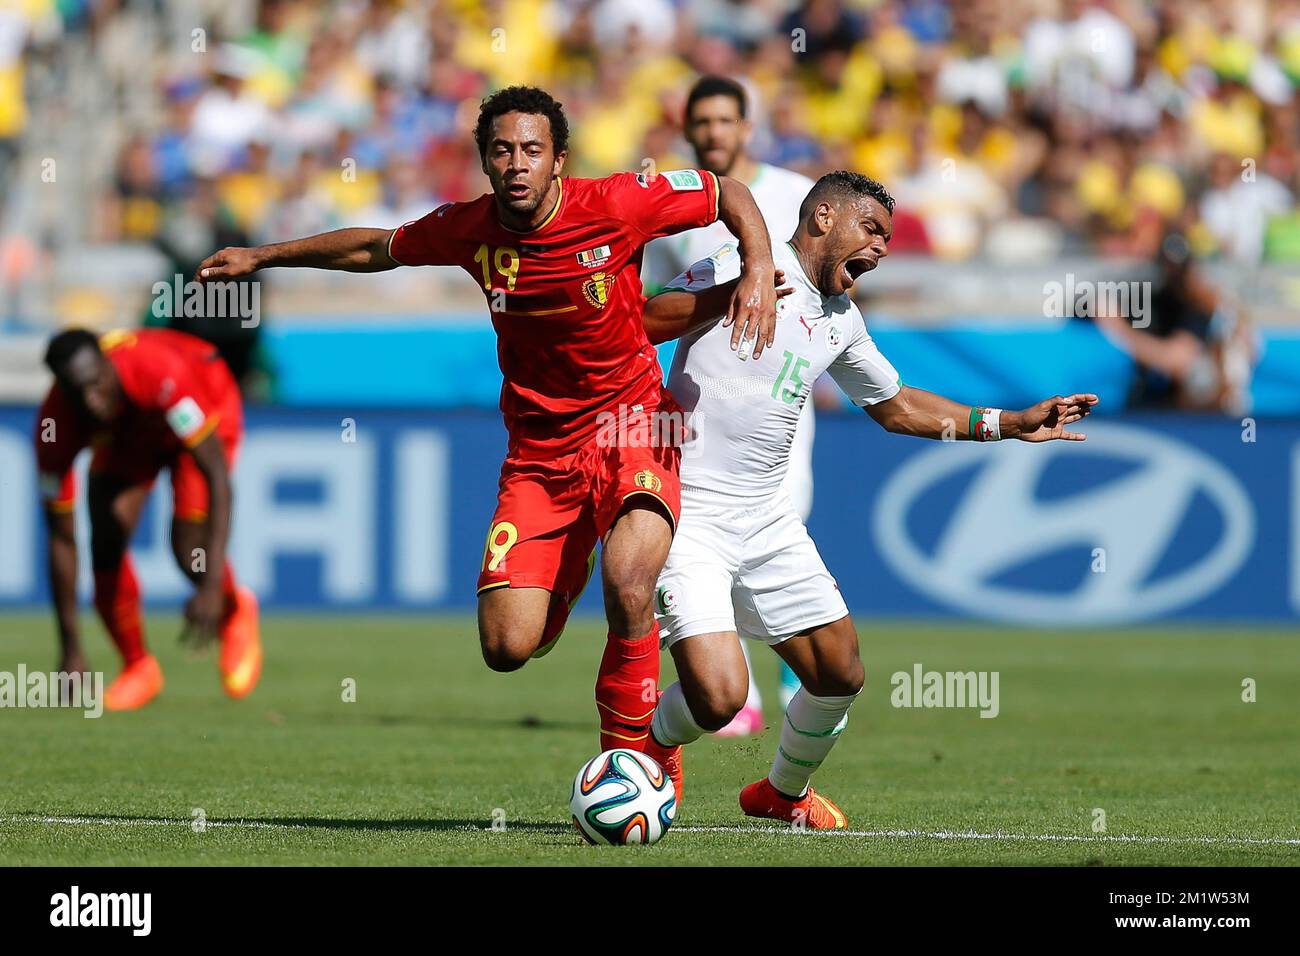 Belgium's Moussa Dembele and Algeria's El Arbi Hillel Soudani fight for the ball during a soccer game between Belgian national team The Red Devils and Algeria in Belo Horizonte, Brazil, the first game in Group H of the first round of the 2014 FIFA World Cup, Tuesday 17 June 2014. Stock Photo